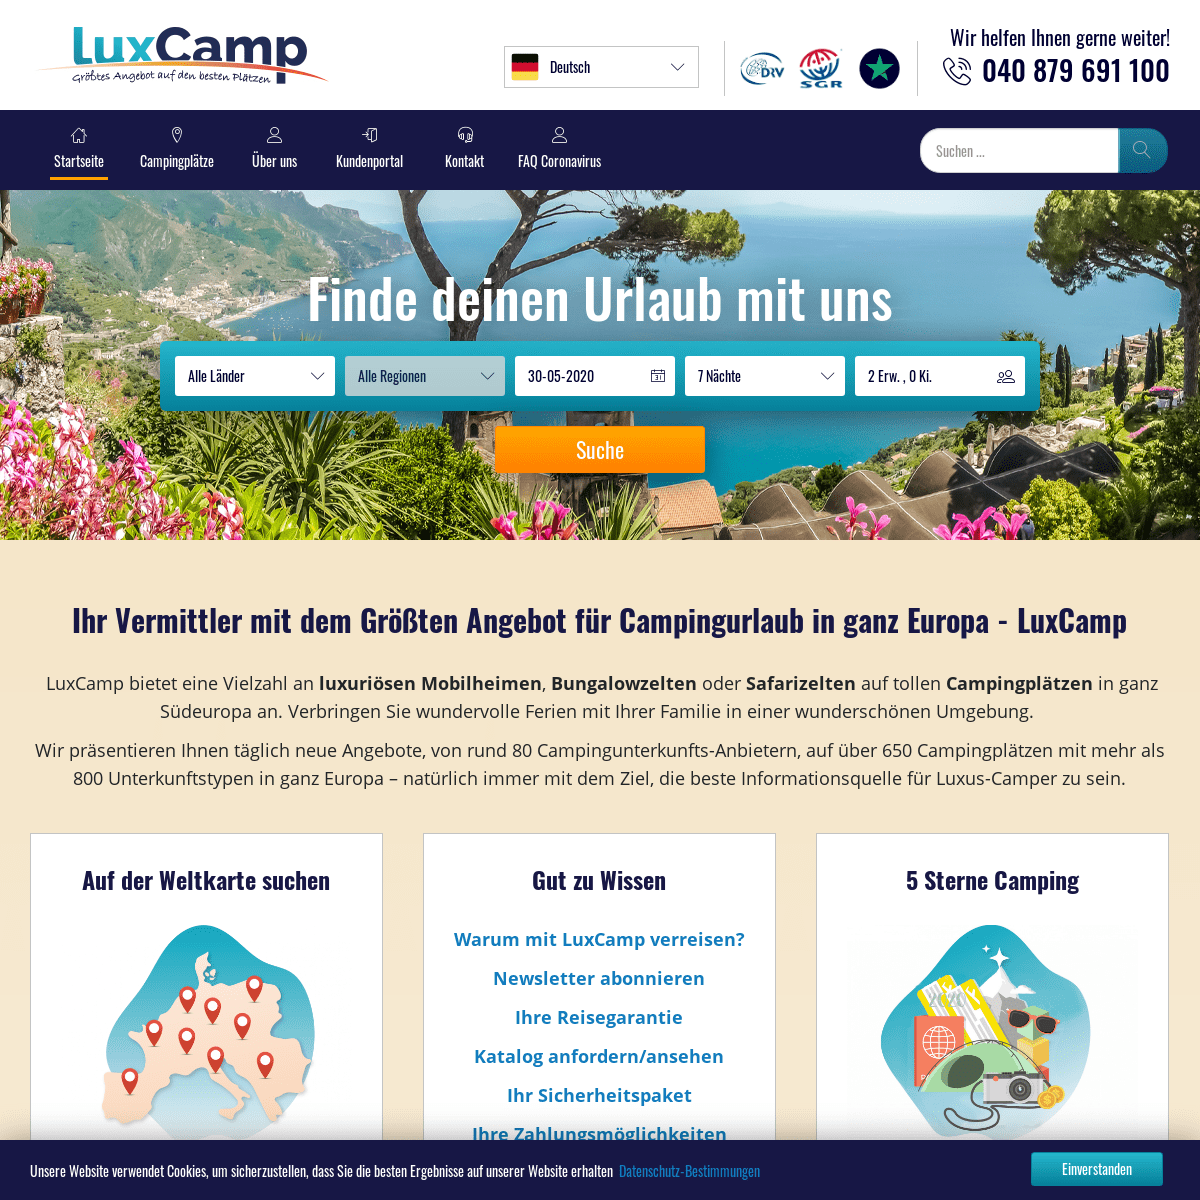 A complete backup of lux-camp.de